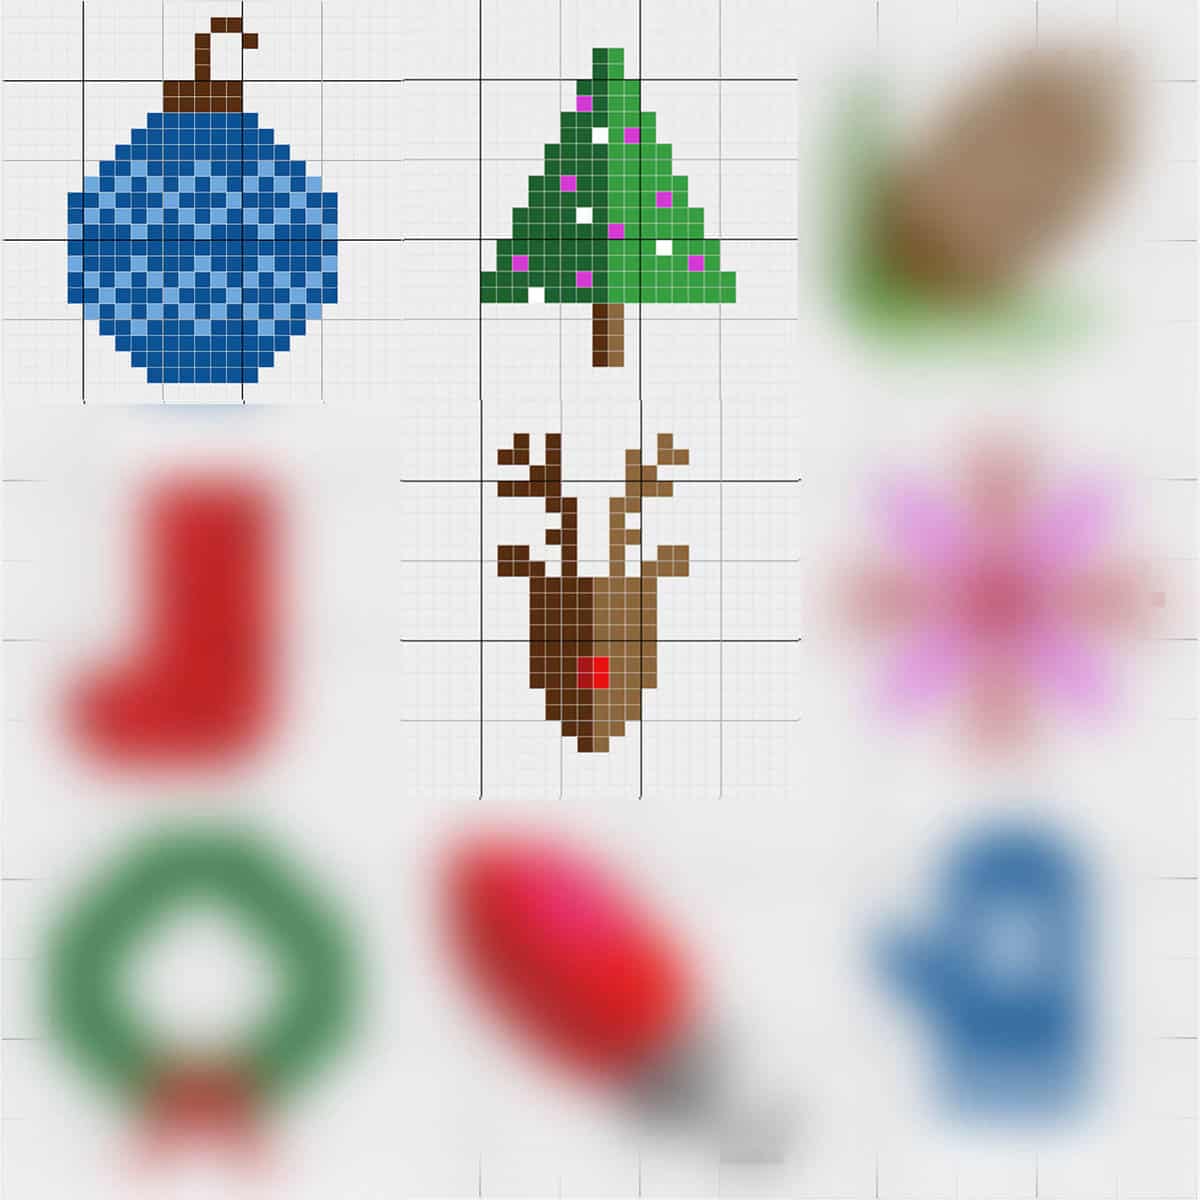 This corner to corner Christmas tree graph is the third of nine free c2c patterns for modern Christmas afghan blocks. Make all the blocks to create a contemporary holiday heirloom or crochet one to make a festive pillow. Click to download all the free graphgan patterns.